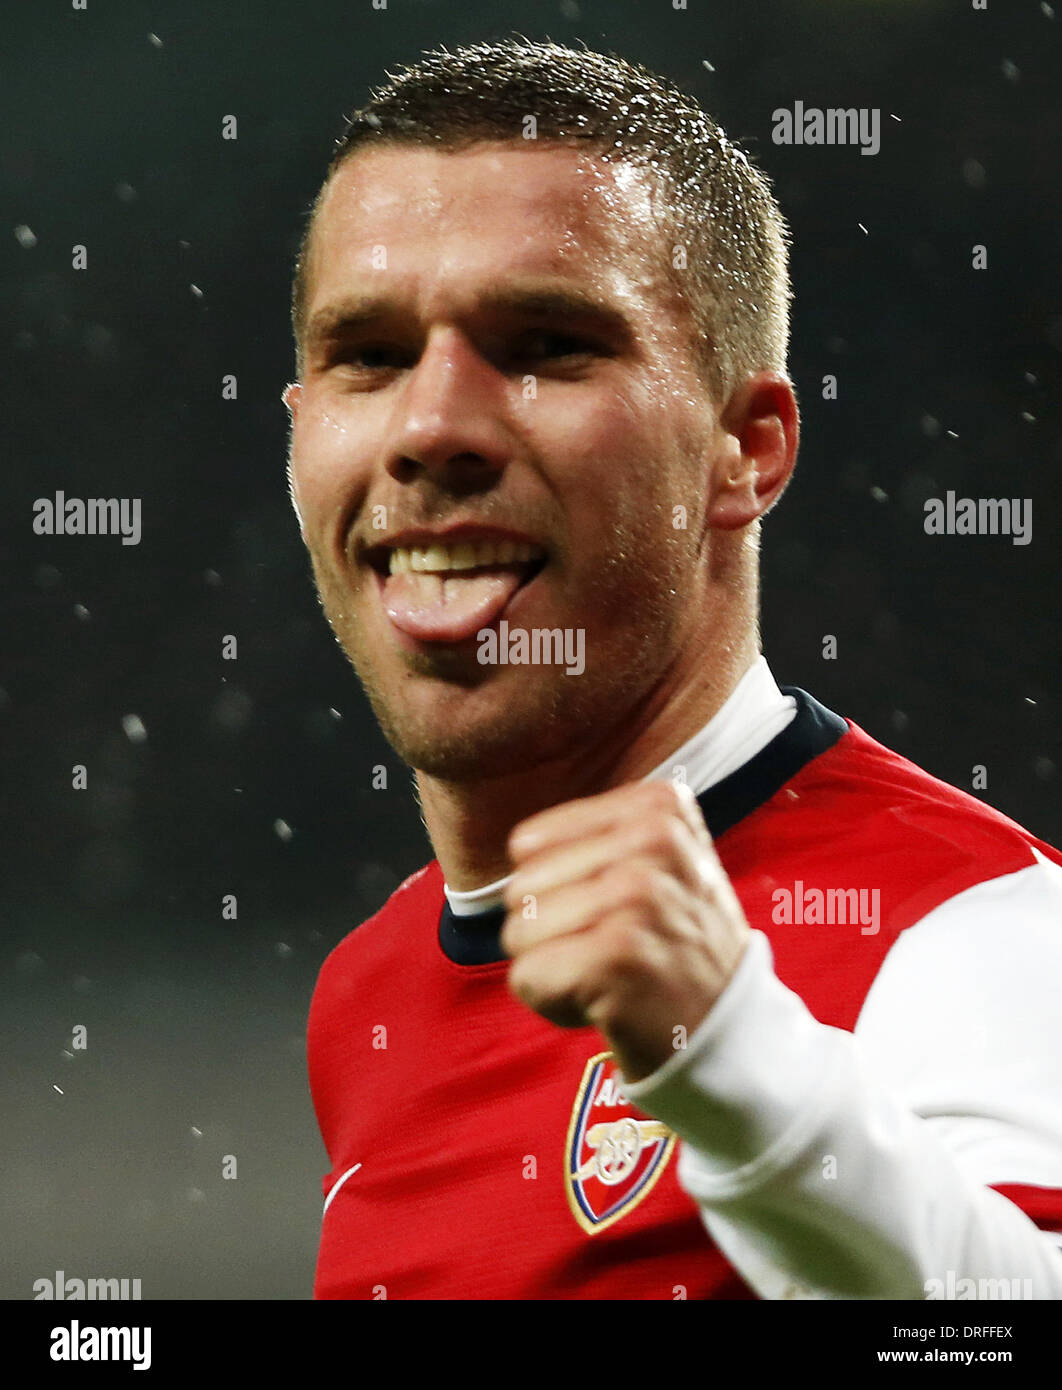 London, UK. 24th Jan, 2014. Lukas Podolski of Arsenal celebrates scoring his second goal during FA Cup Fourth Round match between Arsenal and Coventry City at Emirates Stadium in London, Britain on Jan. 24, 2014. Arsenal won 4-0. Credit:  Wang Lili/Xinhua/Alamy Live News Stock Photo